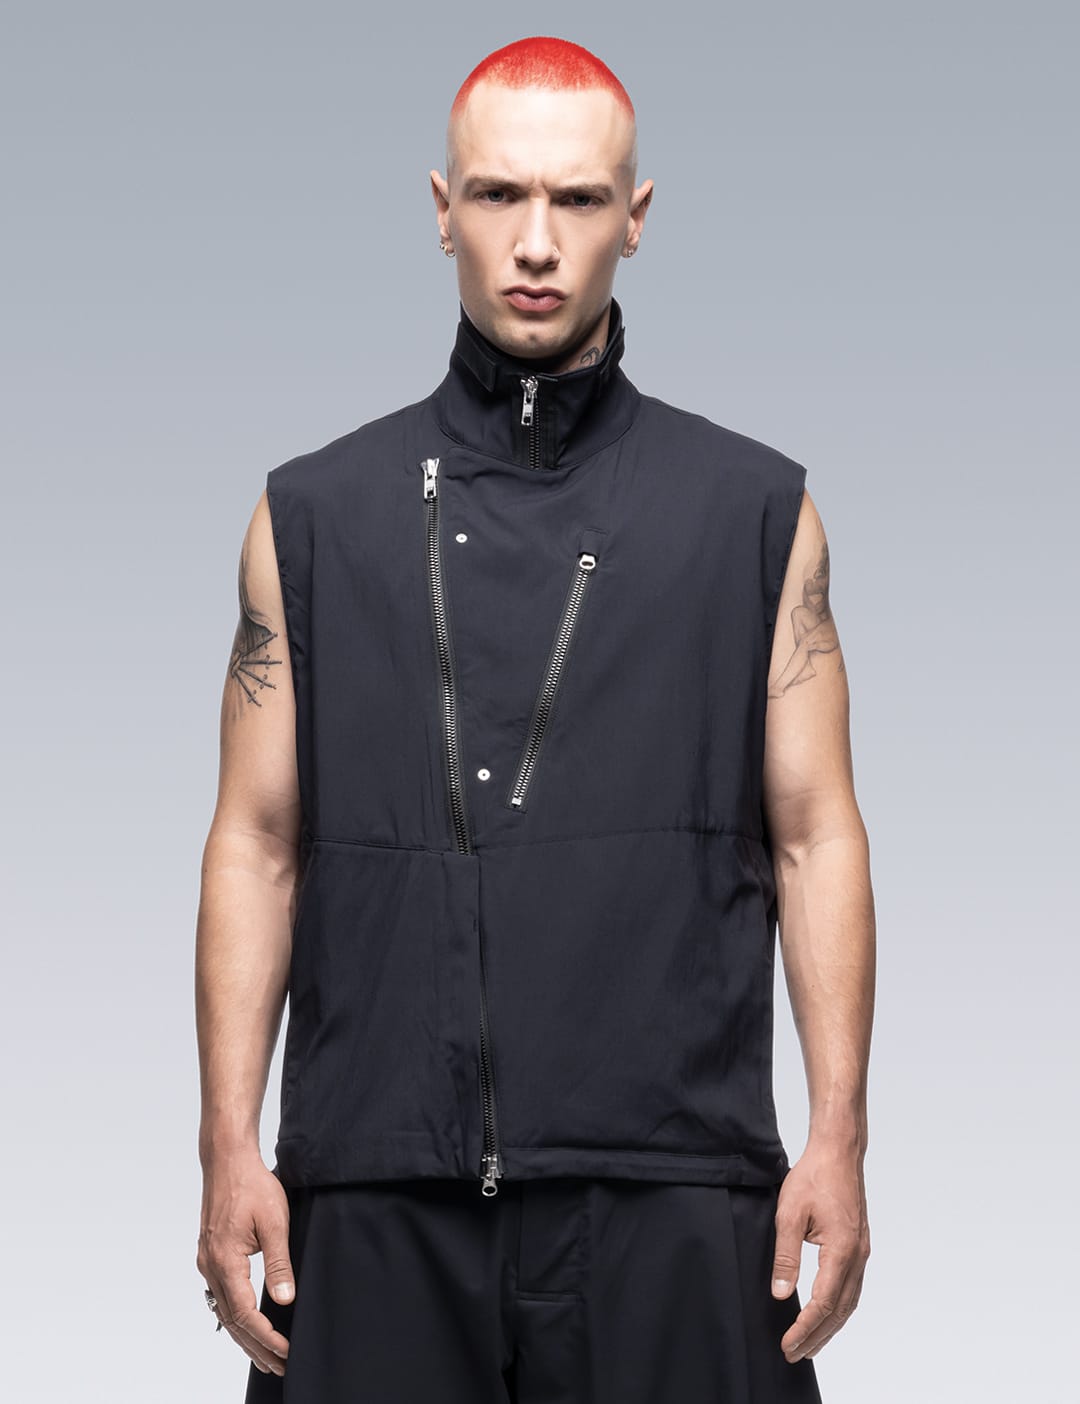 WILD THINGS - MONSTER VEST | HBX - Globally Curated Fashion and 